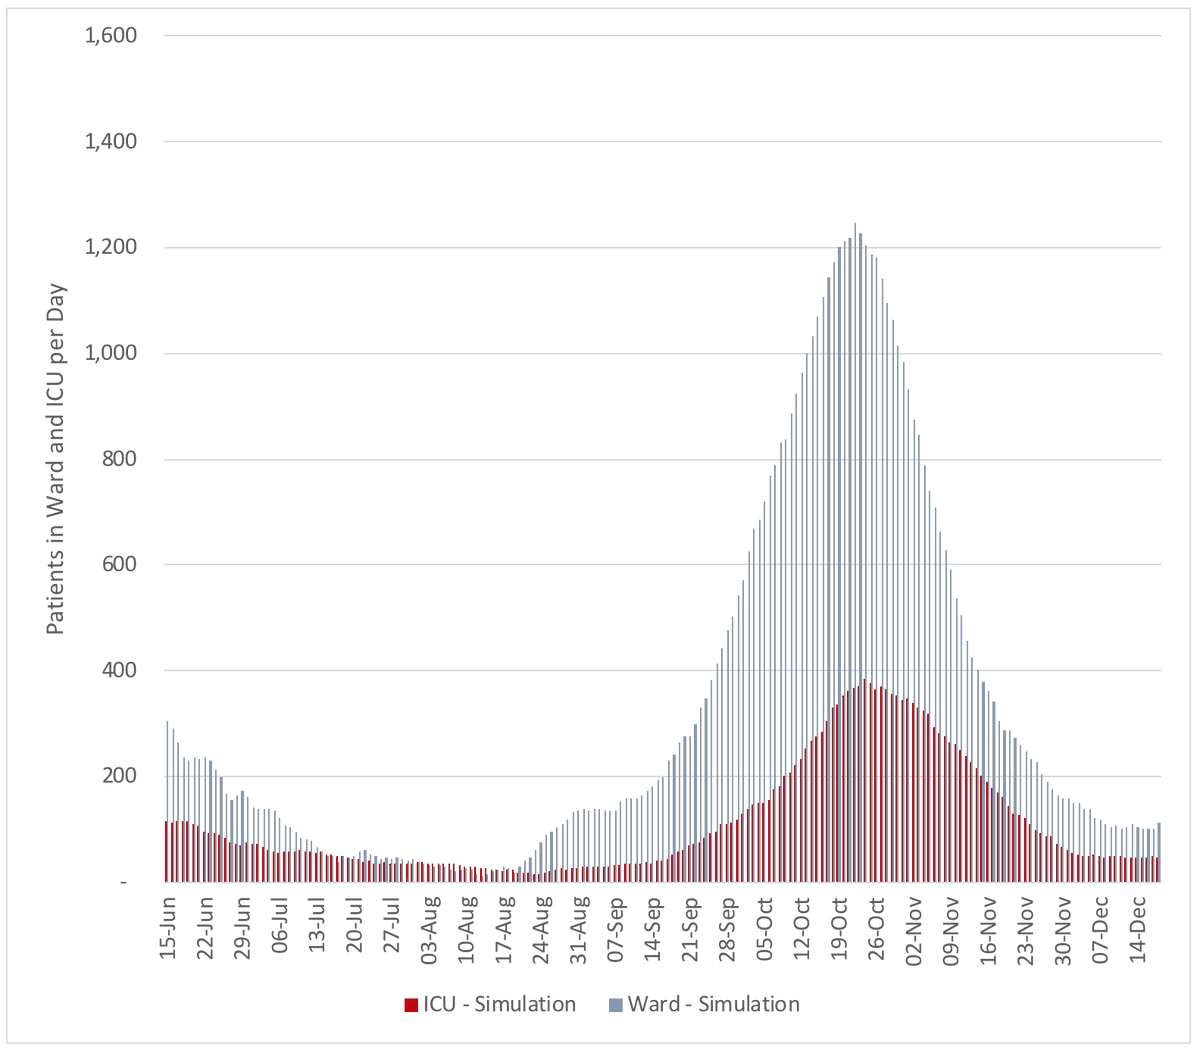 7/ Our scenario considering an epidemic curve like Victoria’s second wave and an intermediate rate of hospitalizations among cases shows a peak of cases in mid-late October, with >1200 patients in ward and >350 patients in ICU beds at peak.